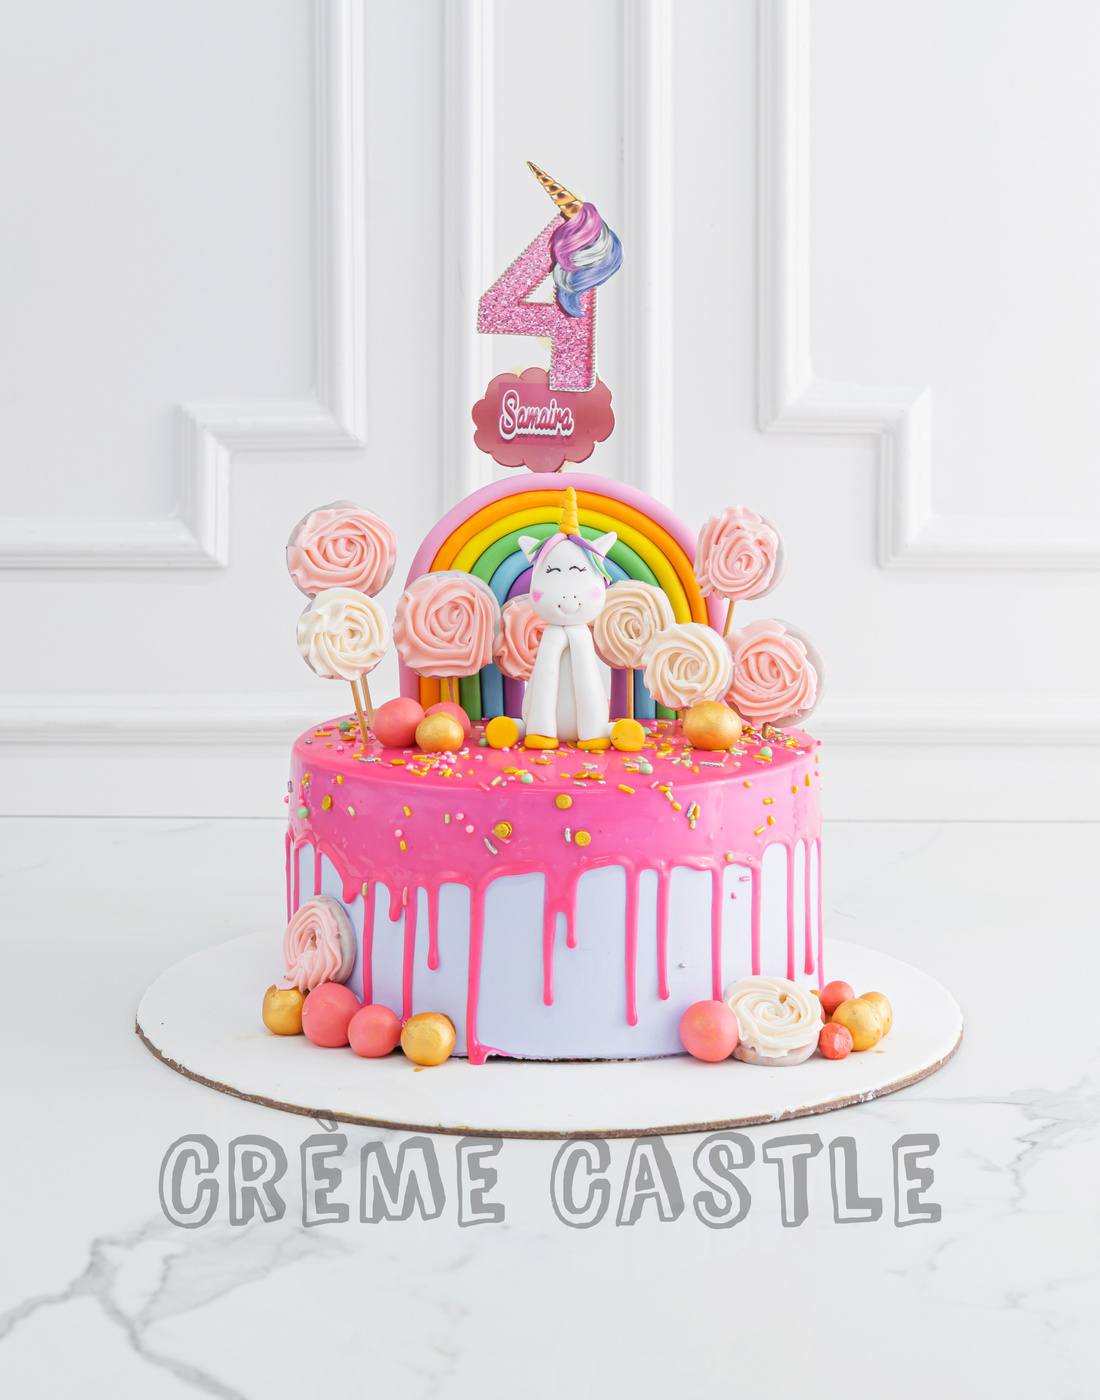 AI Image Generator of Photography-General-Photography_General_Natural Cake  Sculpture castle melting Cream cake Design Idea AI Video Generated by CCC  493893737665861 | PromeAI